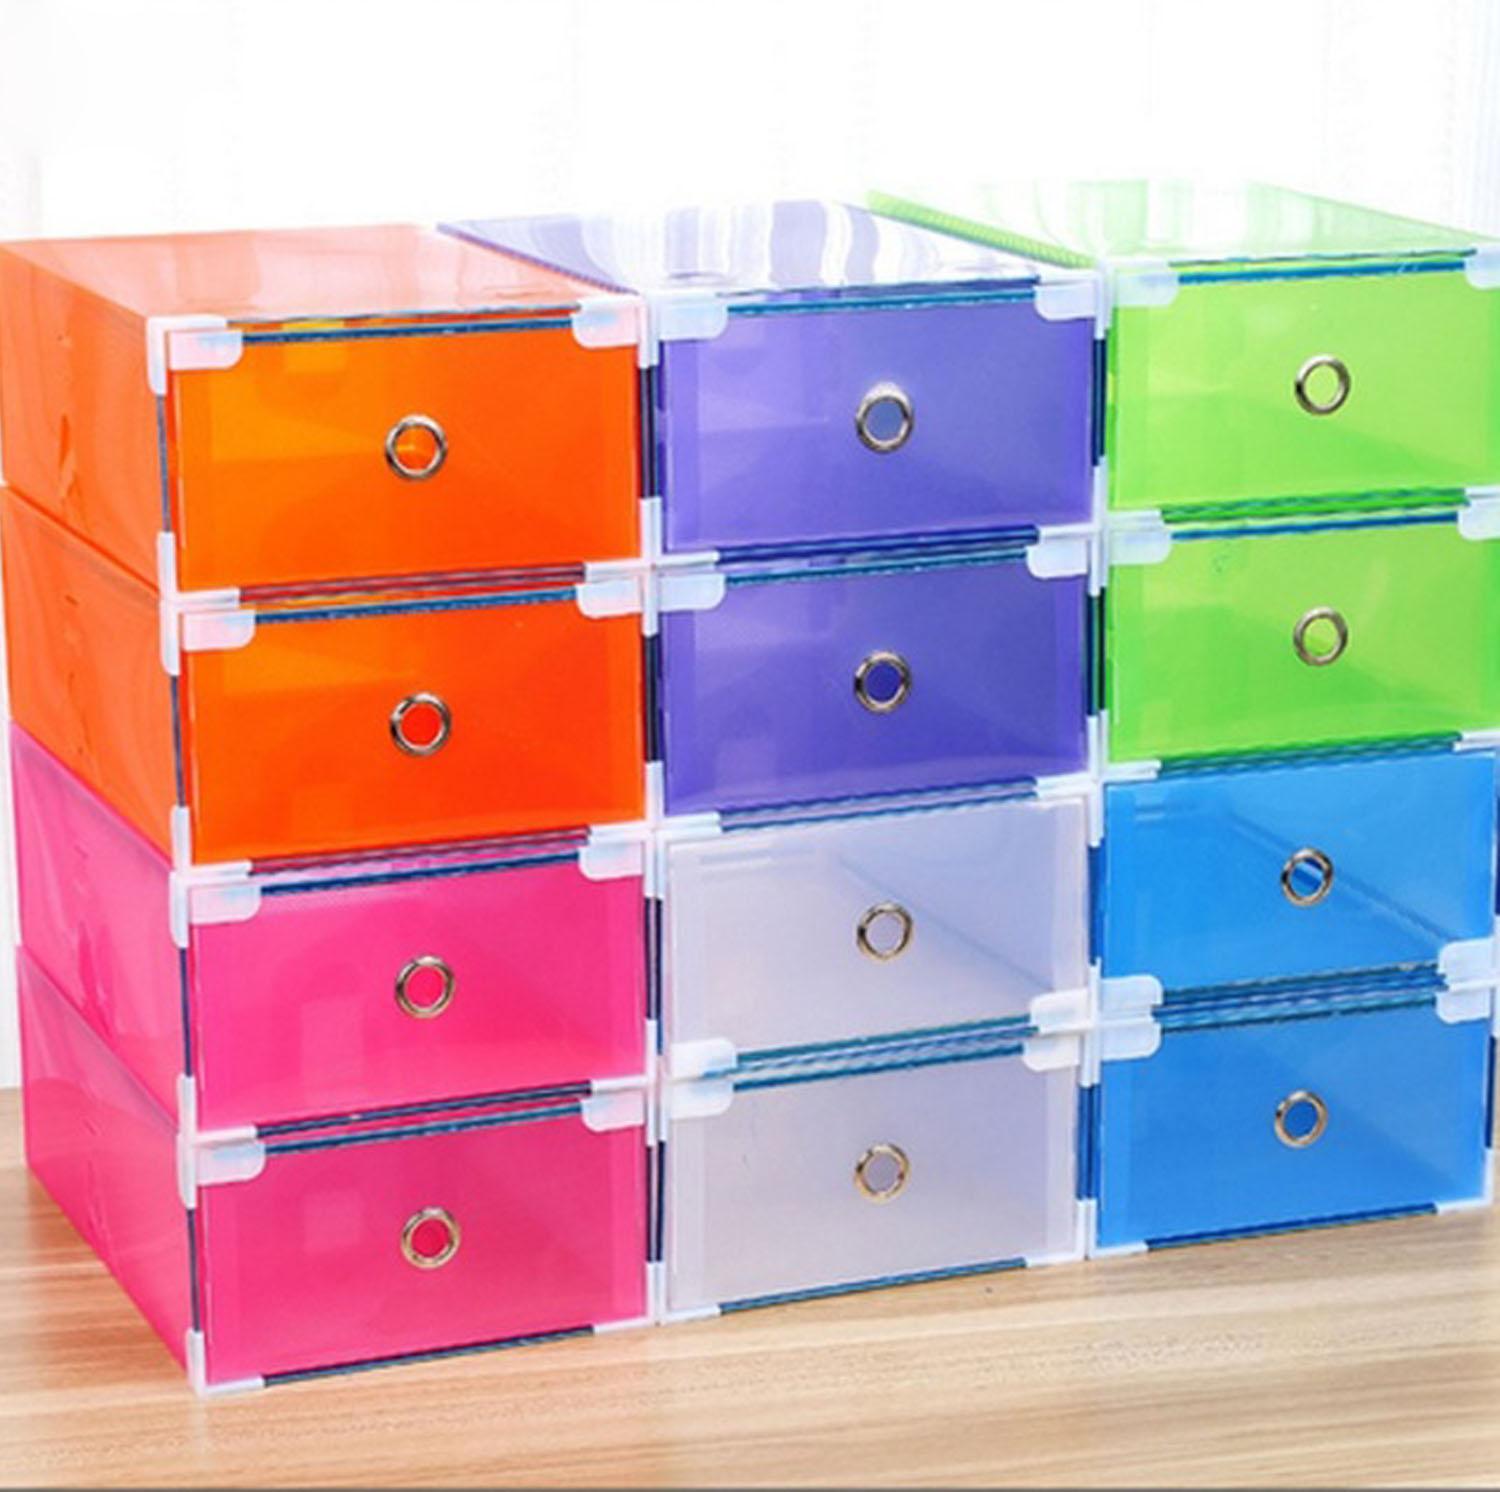 Organizers for sale - Storage Organizers prices, brands & review in Philippines | www.bagssaleusa.com